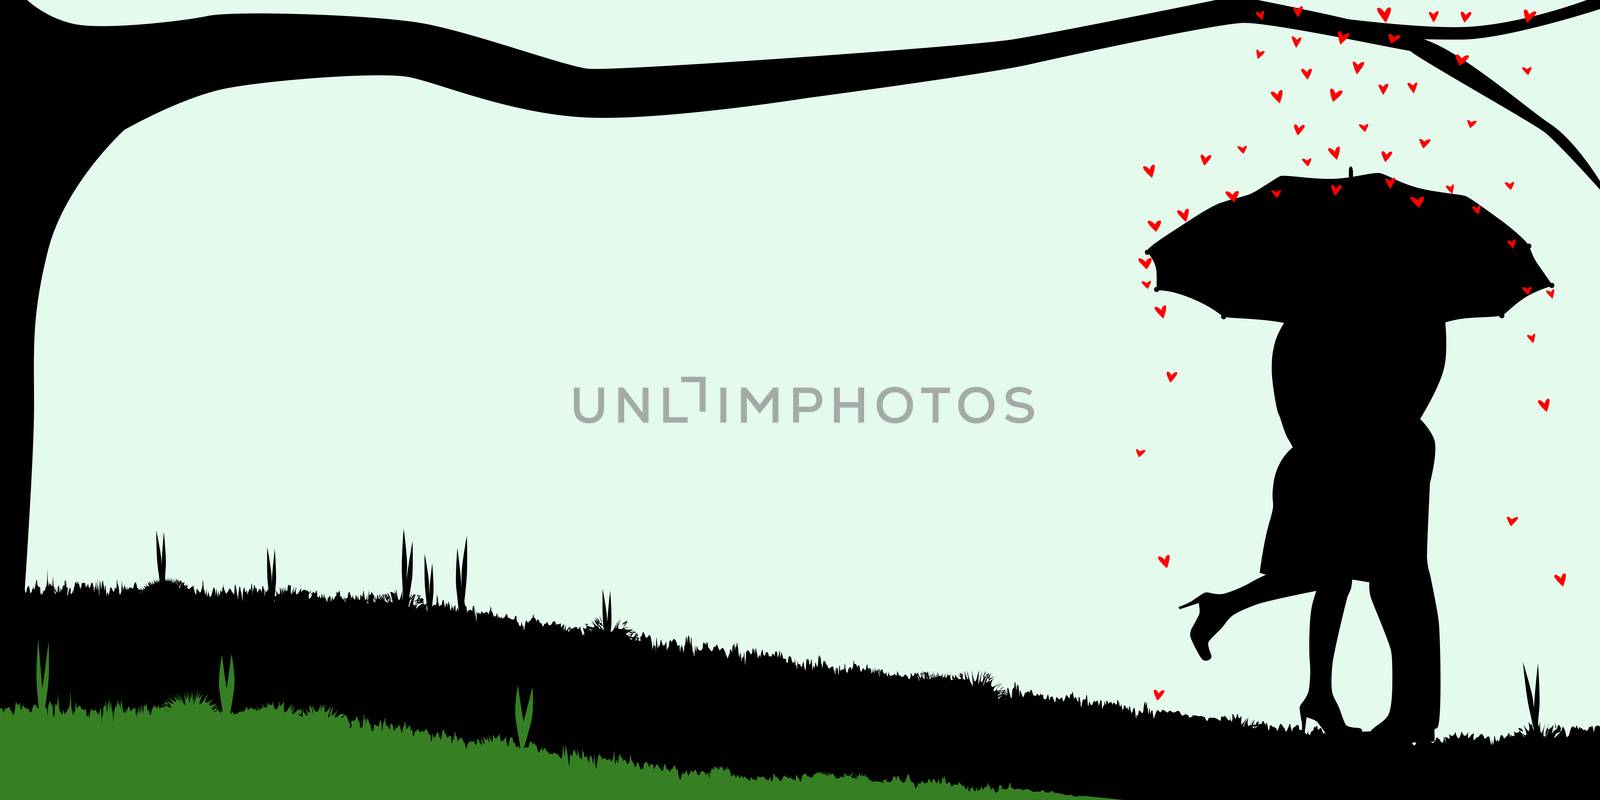 A courting couple, silhouette ,, kissing under an umbrella, during a downpour of red cupids hearts